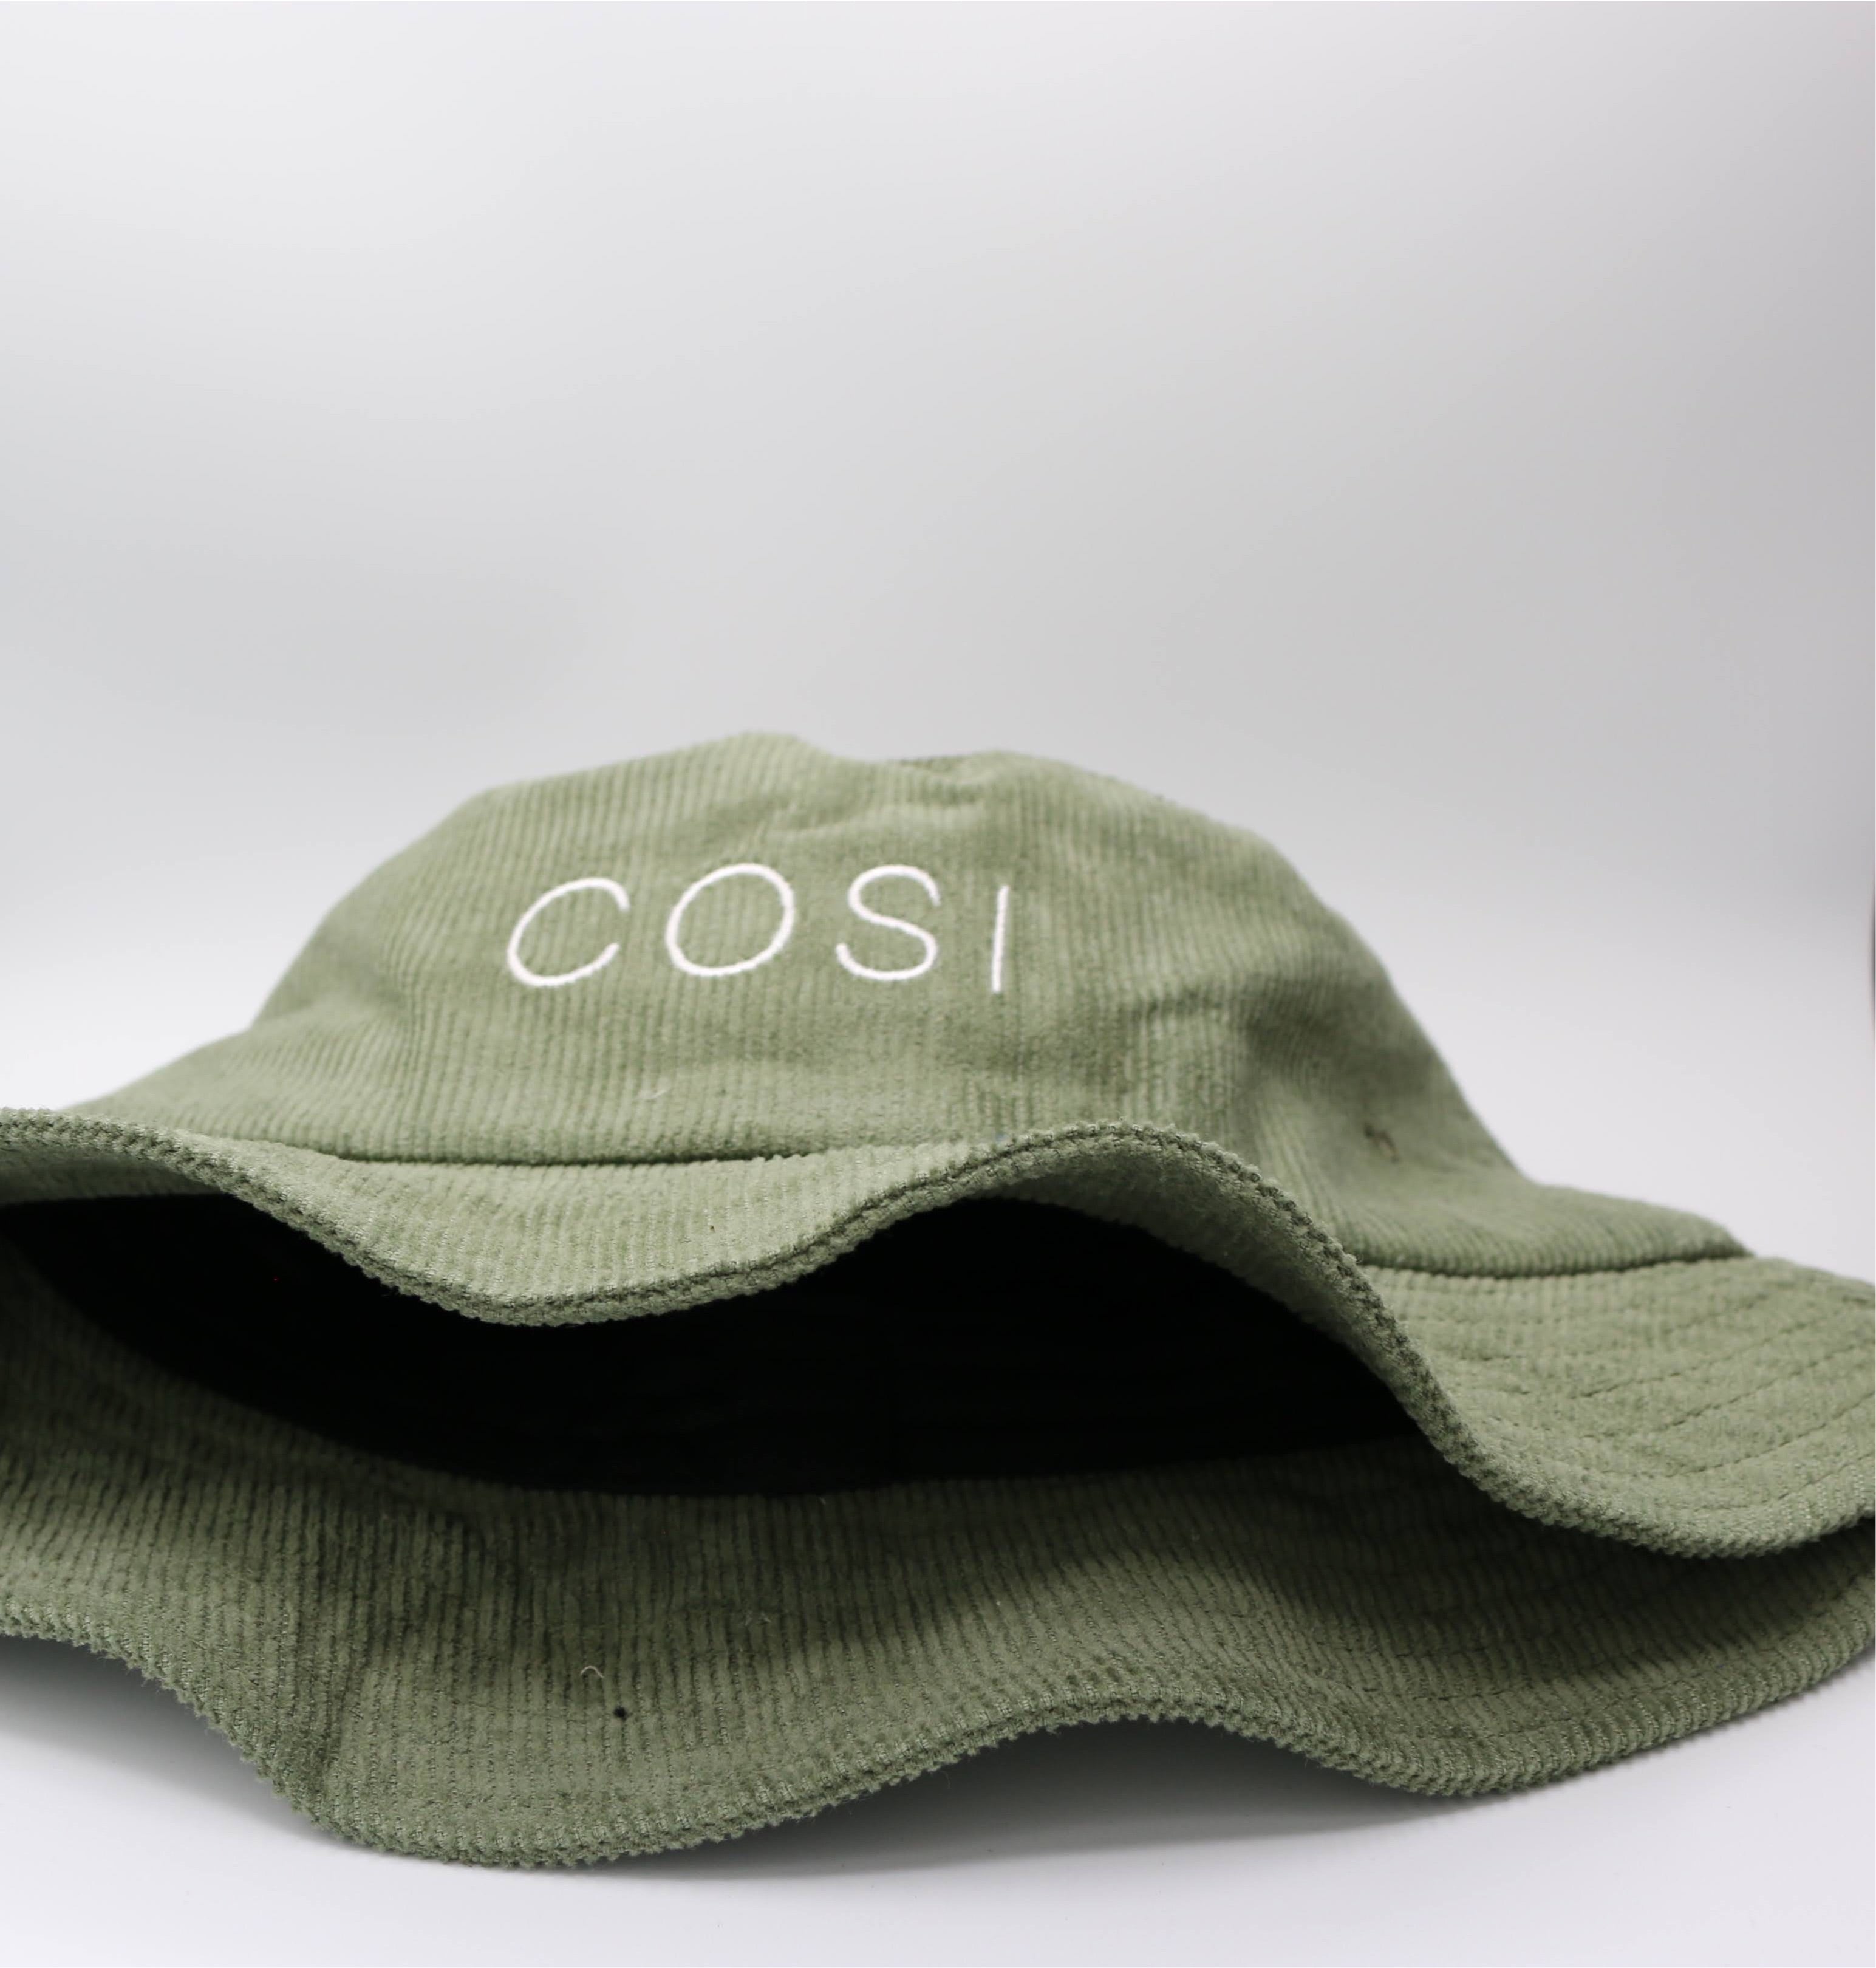 THE OLIVE GREEN BUCKET HAT